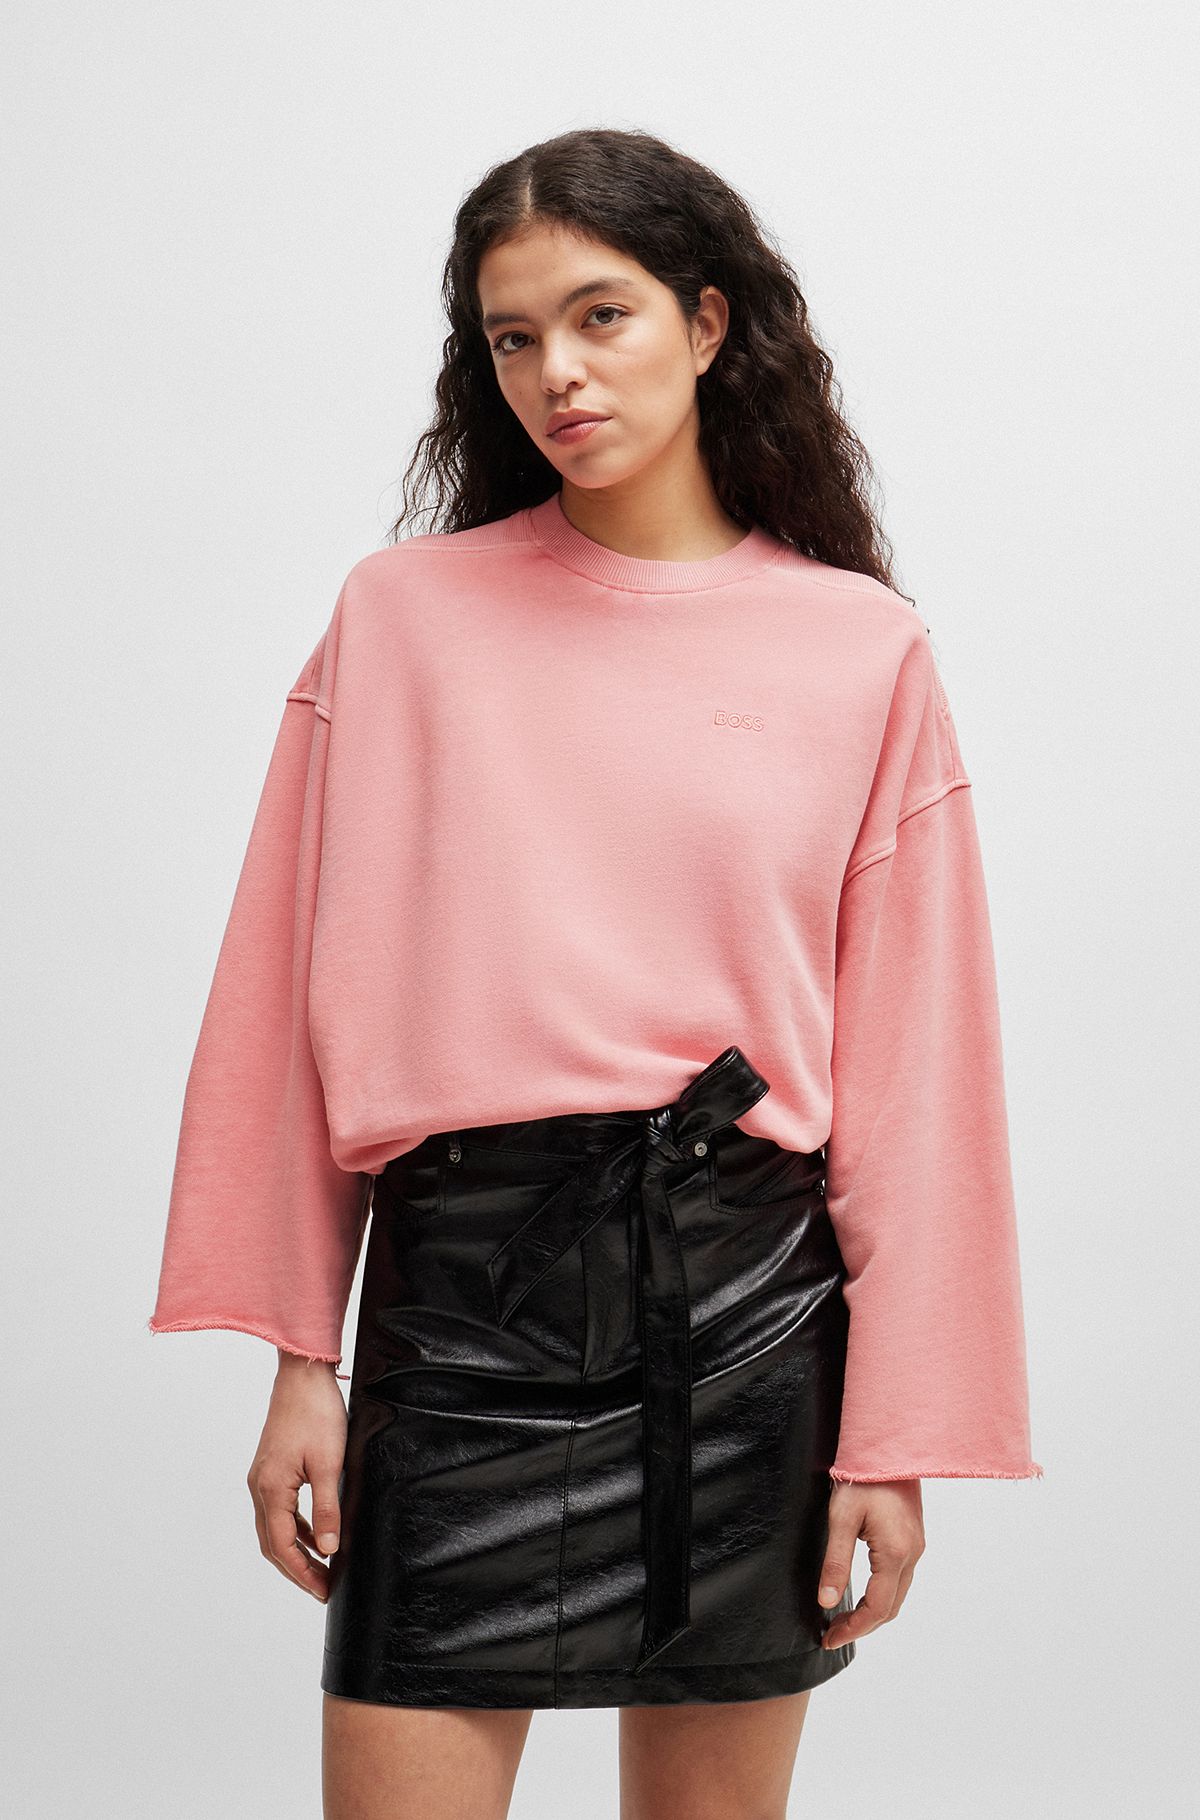 Cotton-terry sweatshirt with drawcord cuffs, light pink